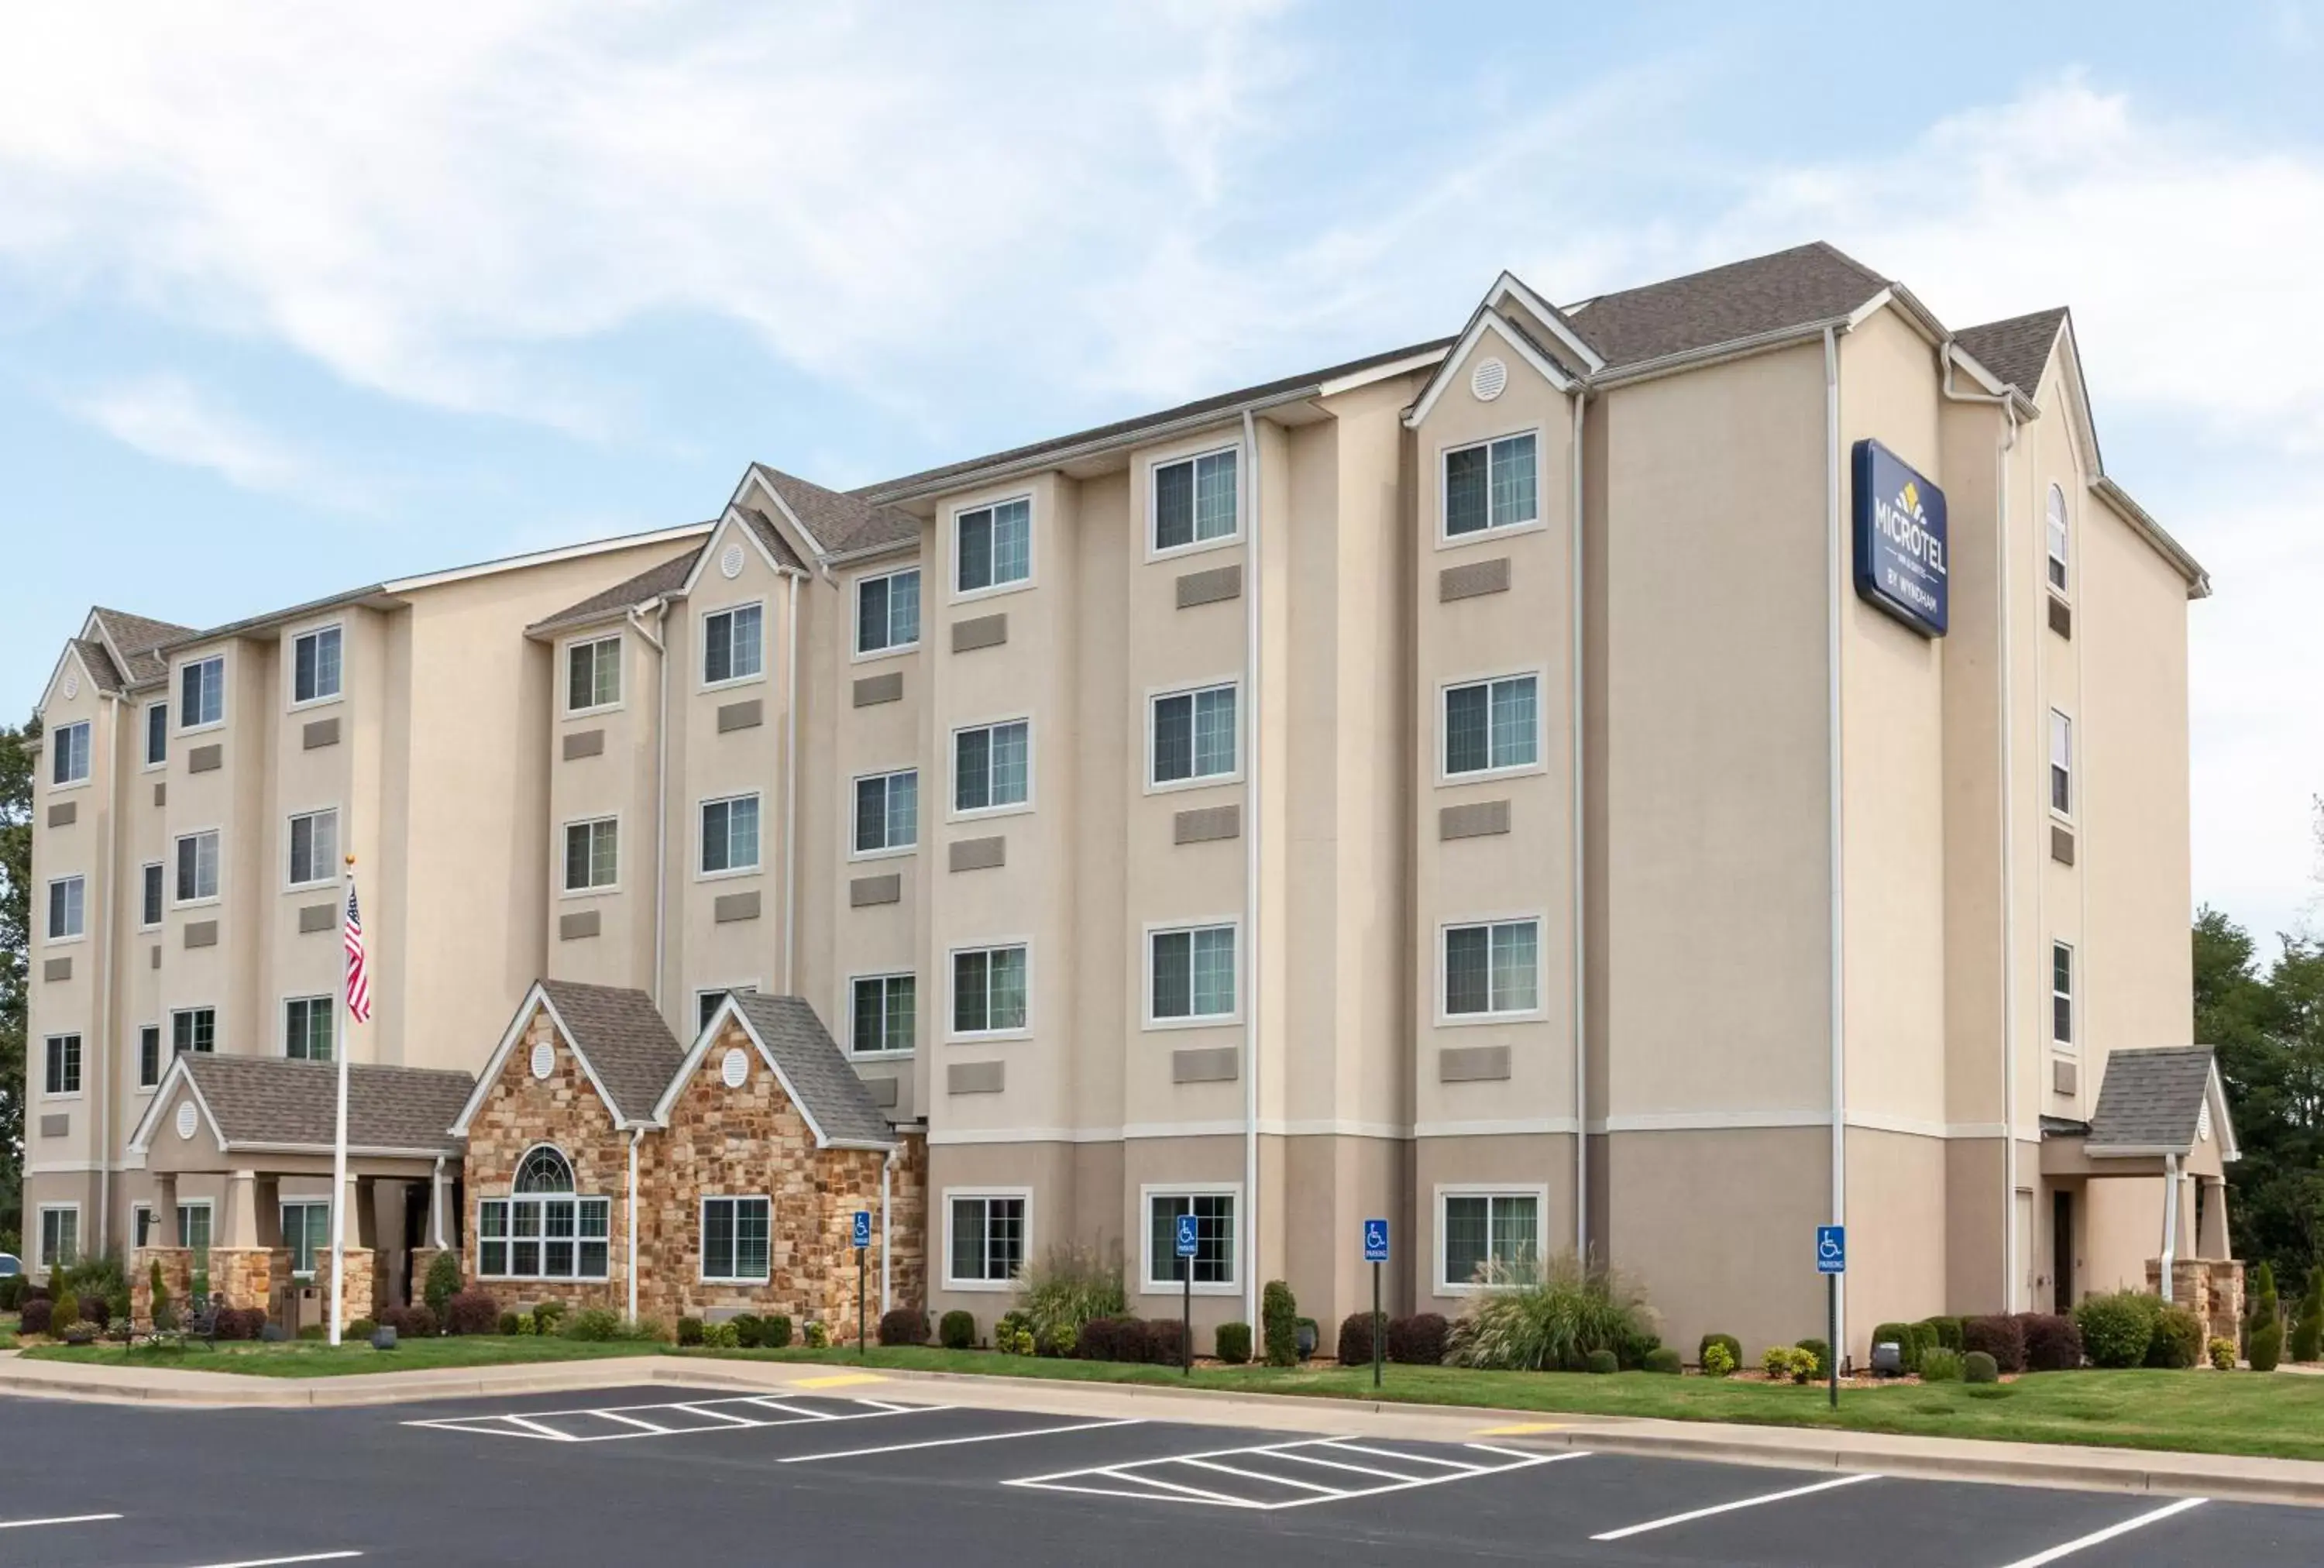 Facade/entrance, Property Building in Microtel Inn & Suites by Wyndham Searcy